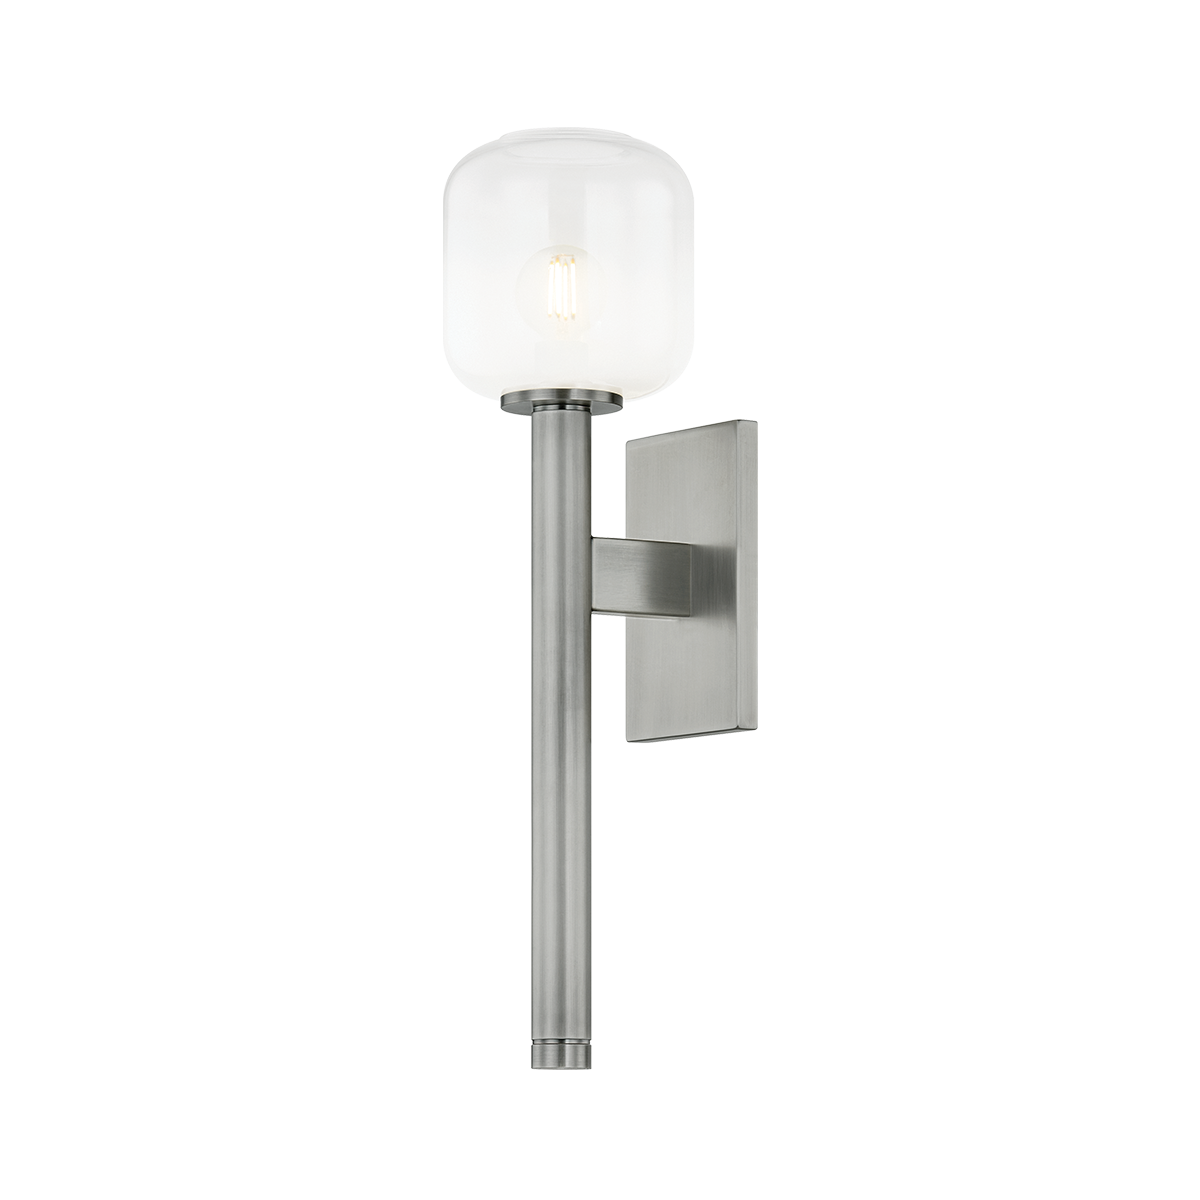 Troy Lighting - B2119-VPT - One Light Wall Sconce - Axton - Vintage Pewter